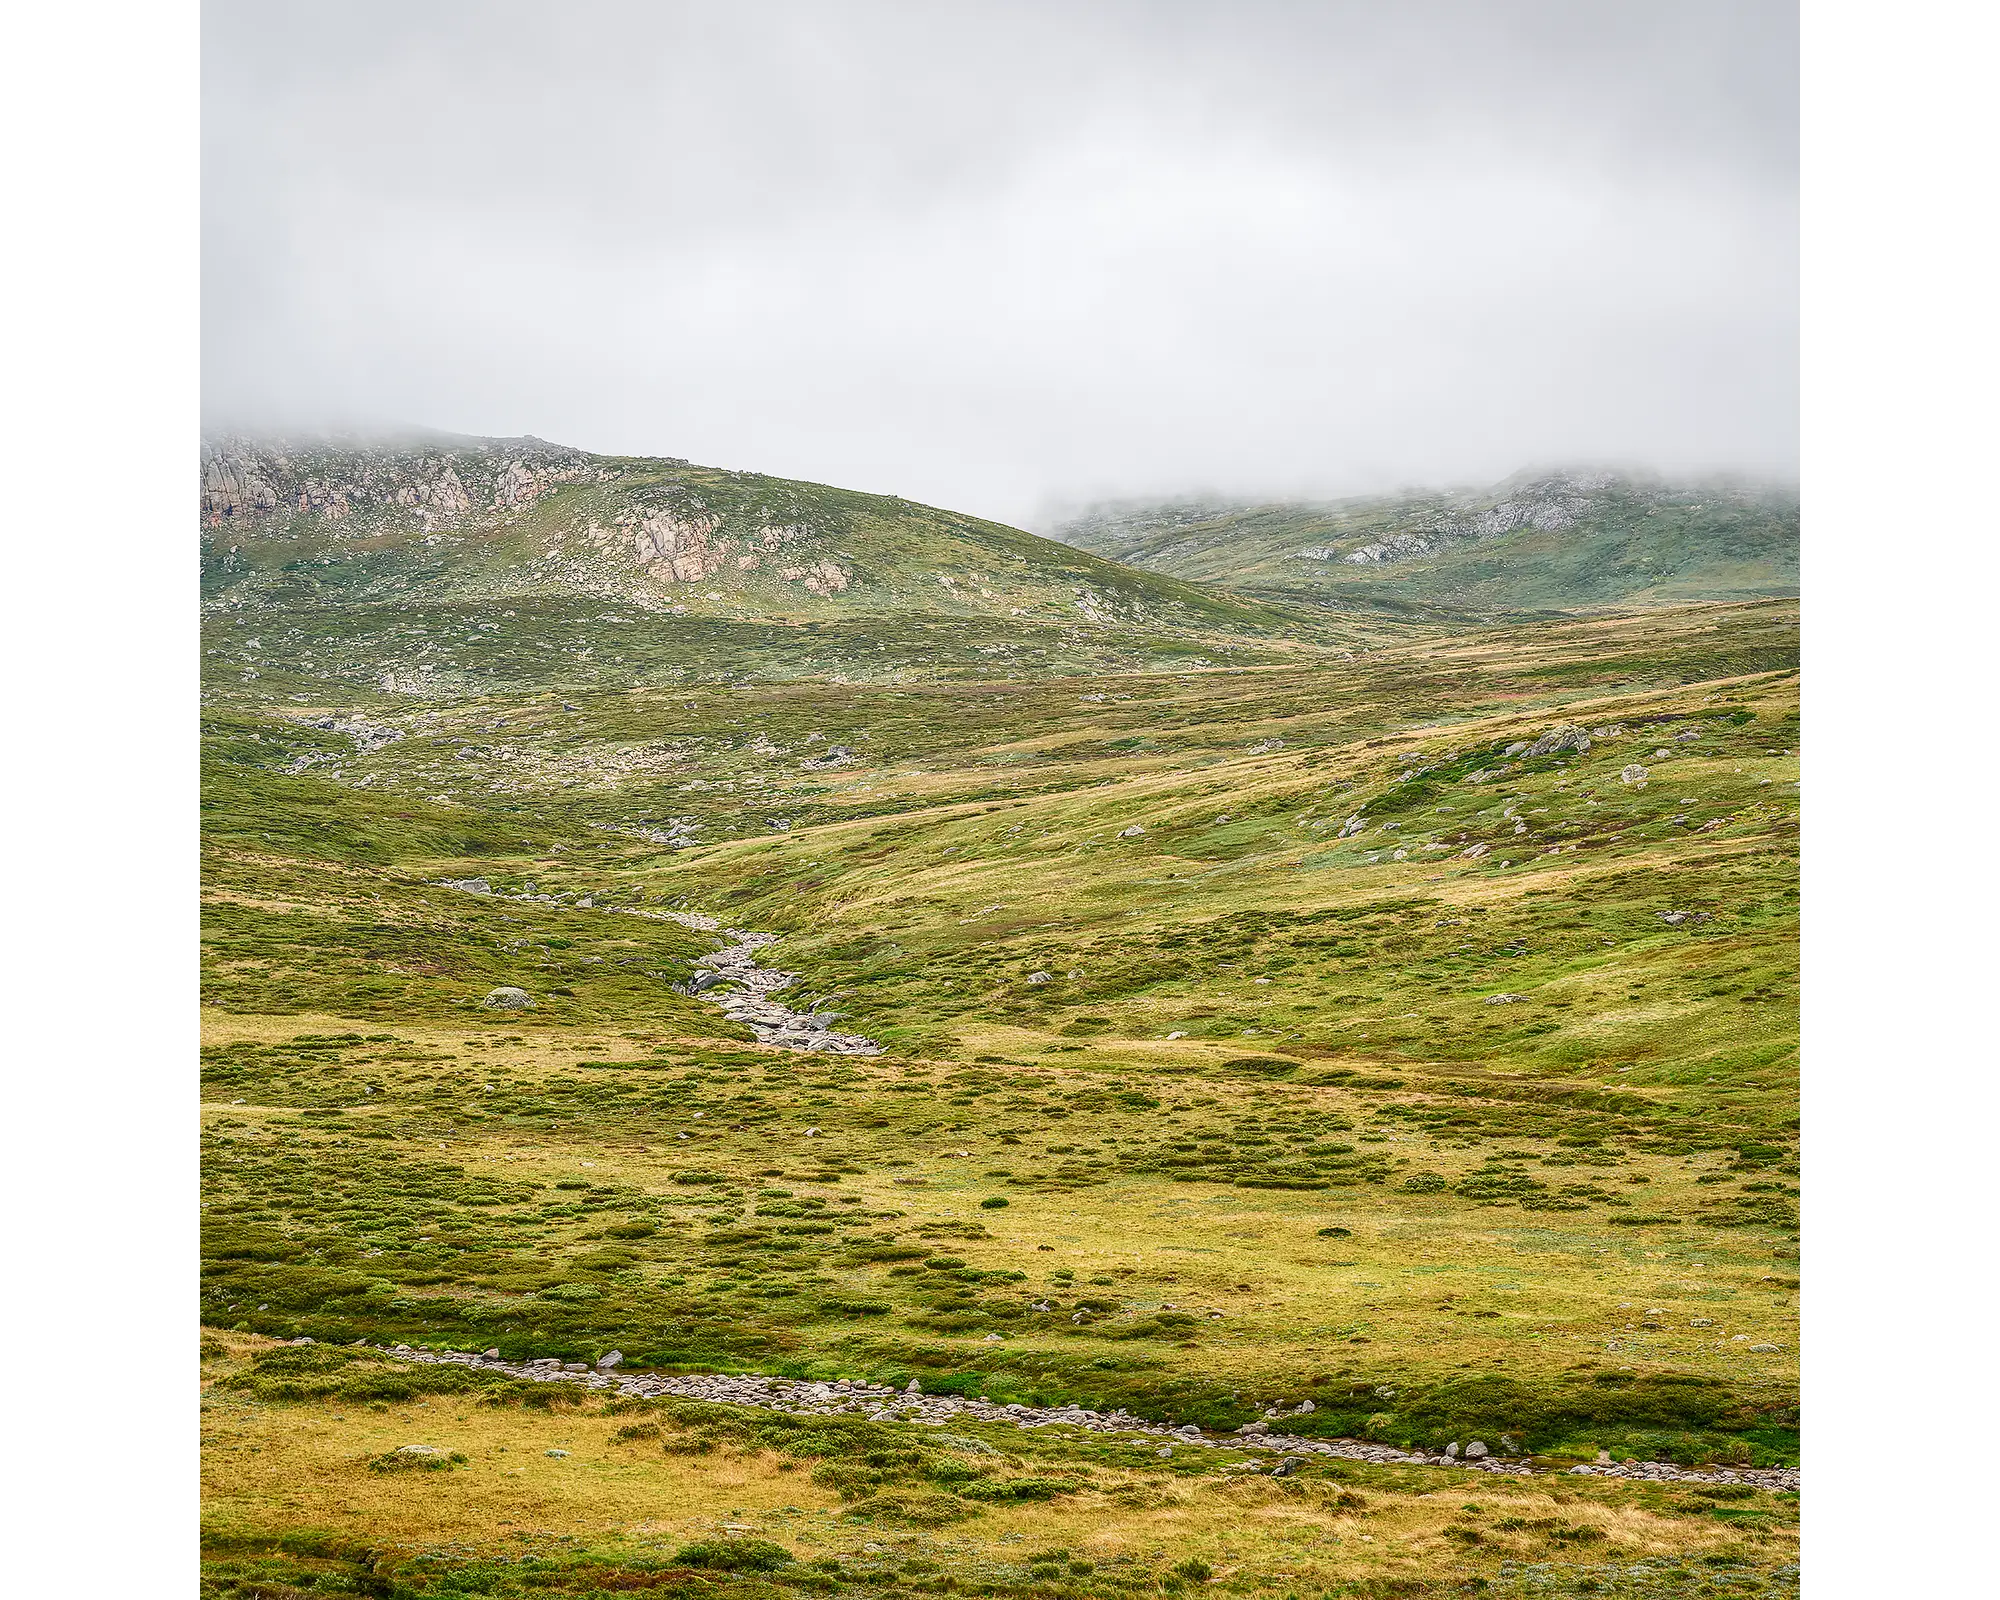 Fog and rolling green hills surrounding the Snowy River, Kosciuszko National Park, NSW. 